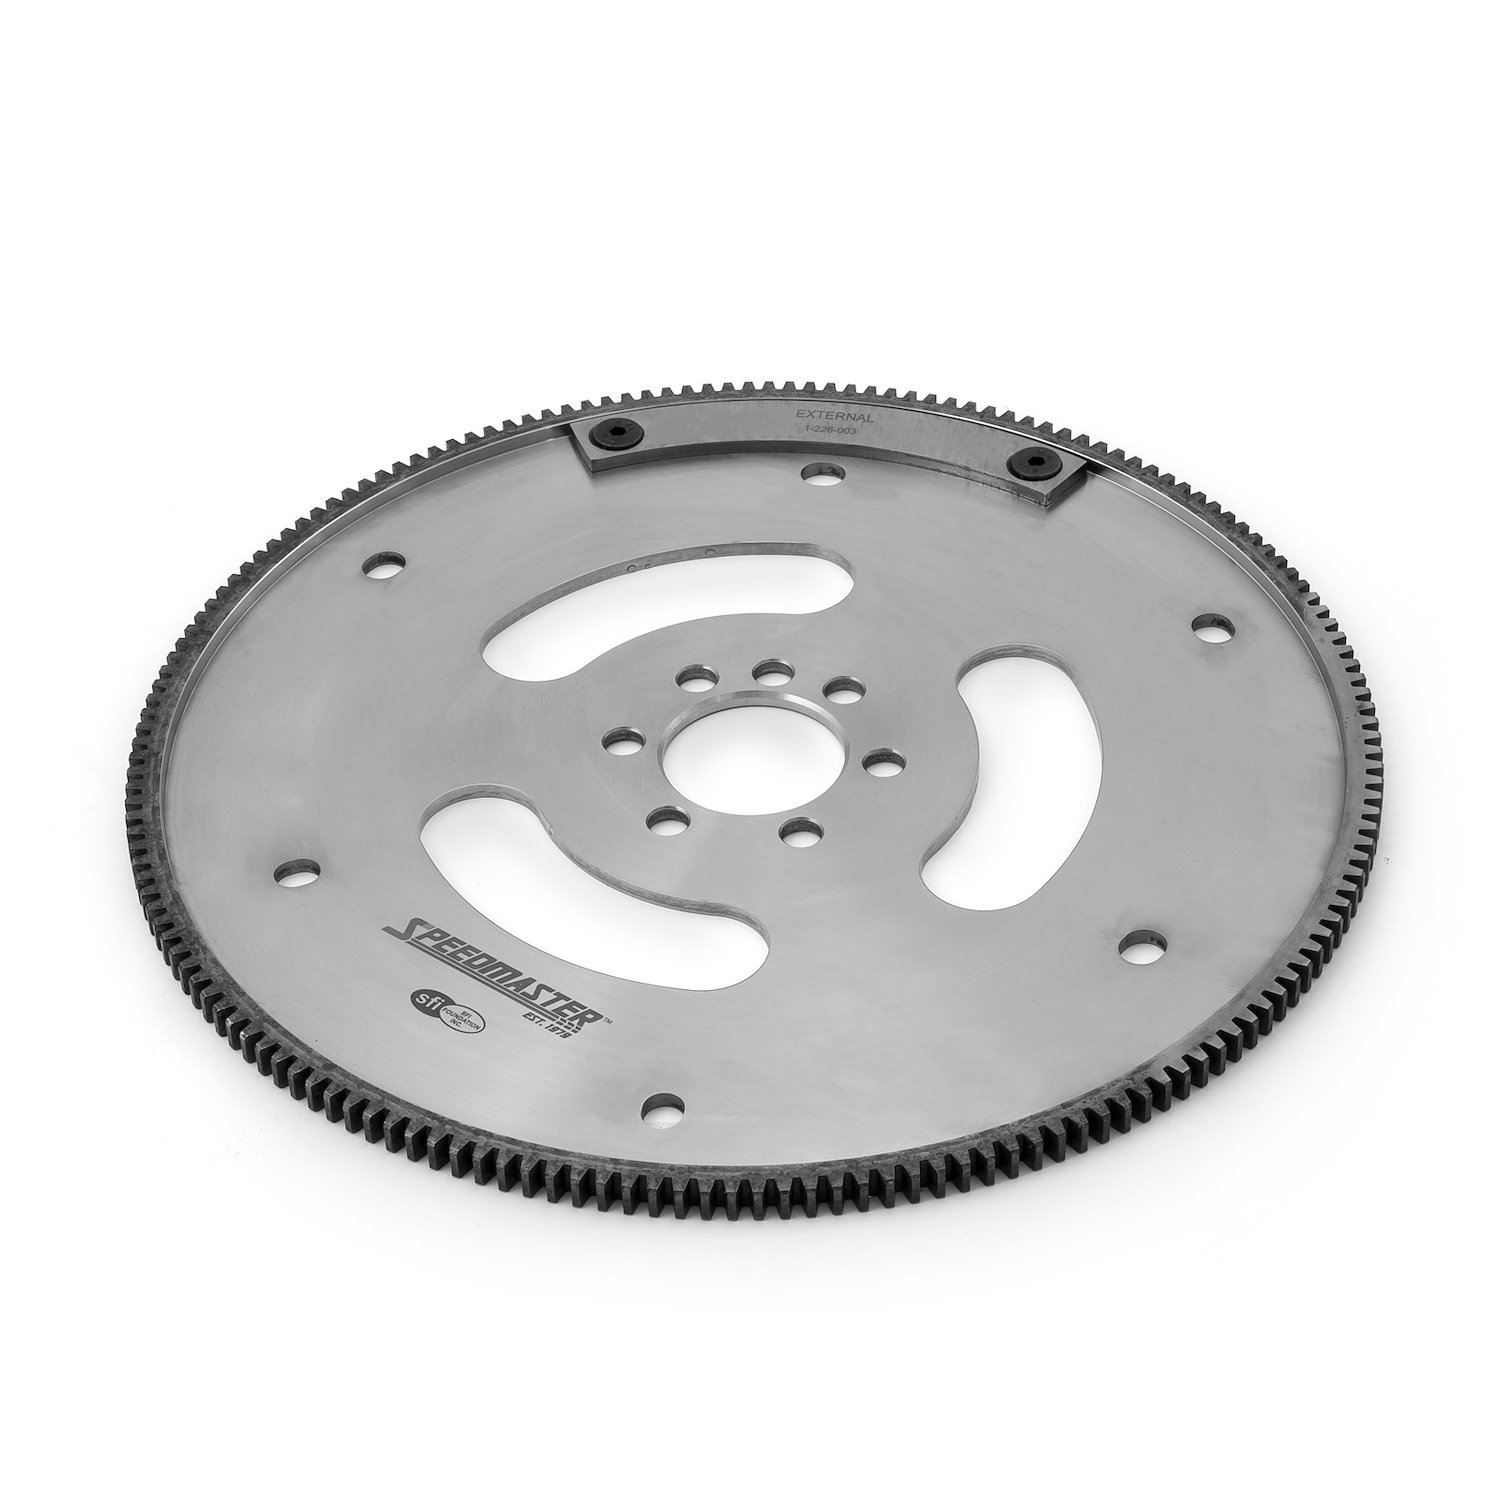 1-226-003 Chevy SBC 350 Late 1PC Rms 168 Tooth DNA Billet SFI Flexplate